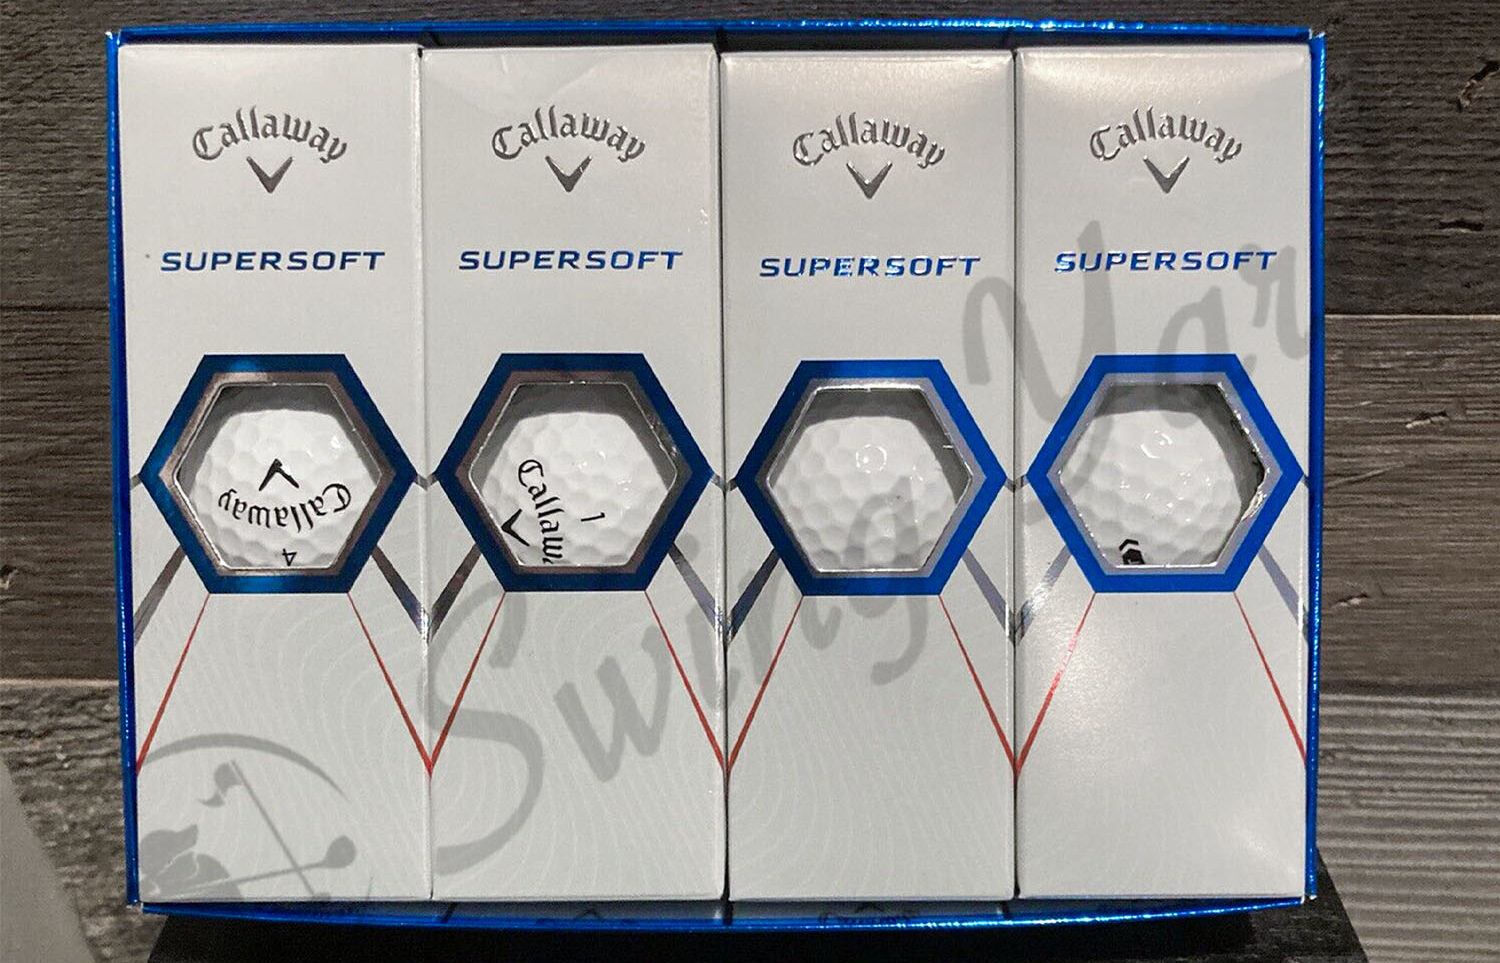 A box package of Callaway Supersoft golf balls at my house